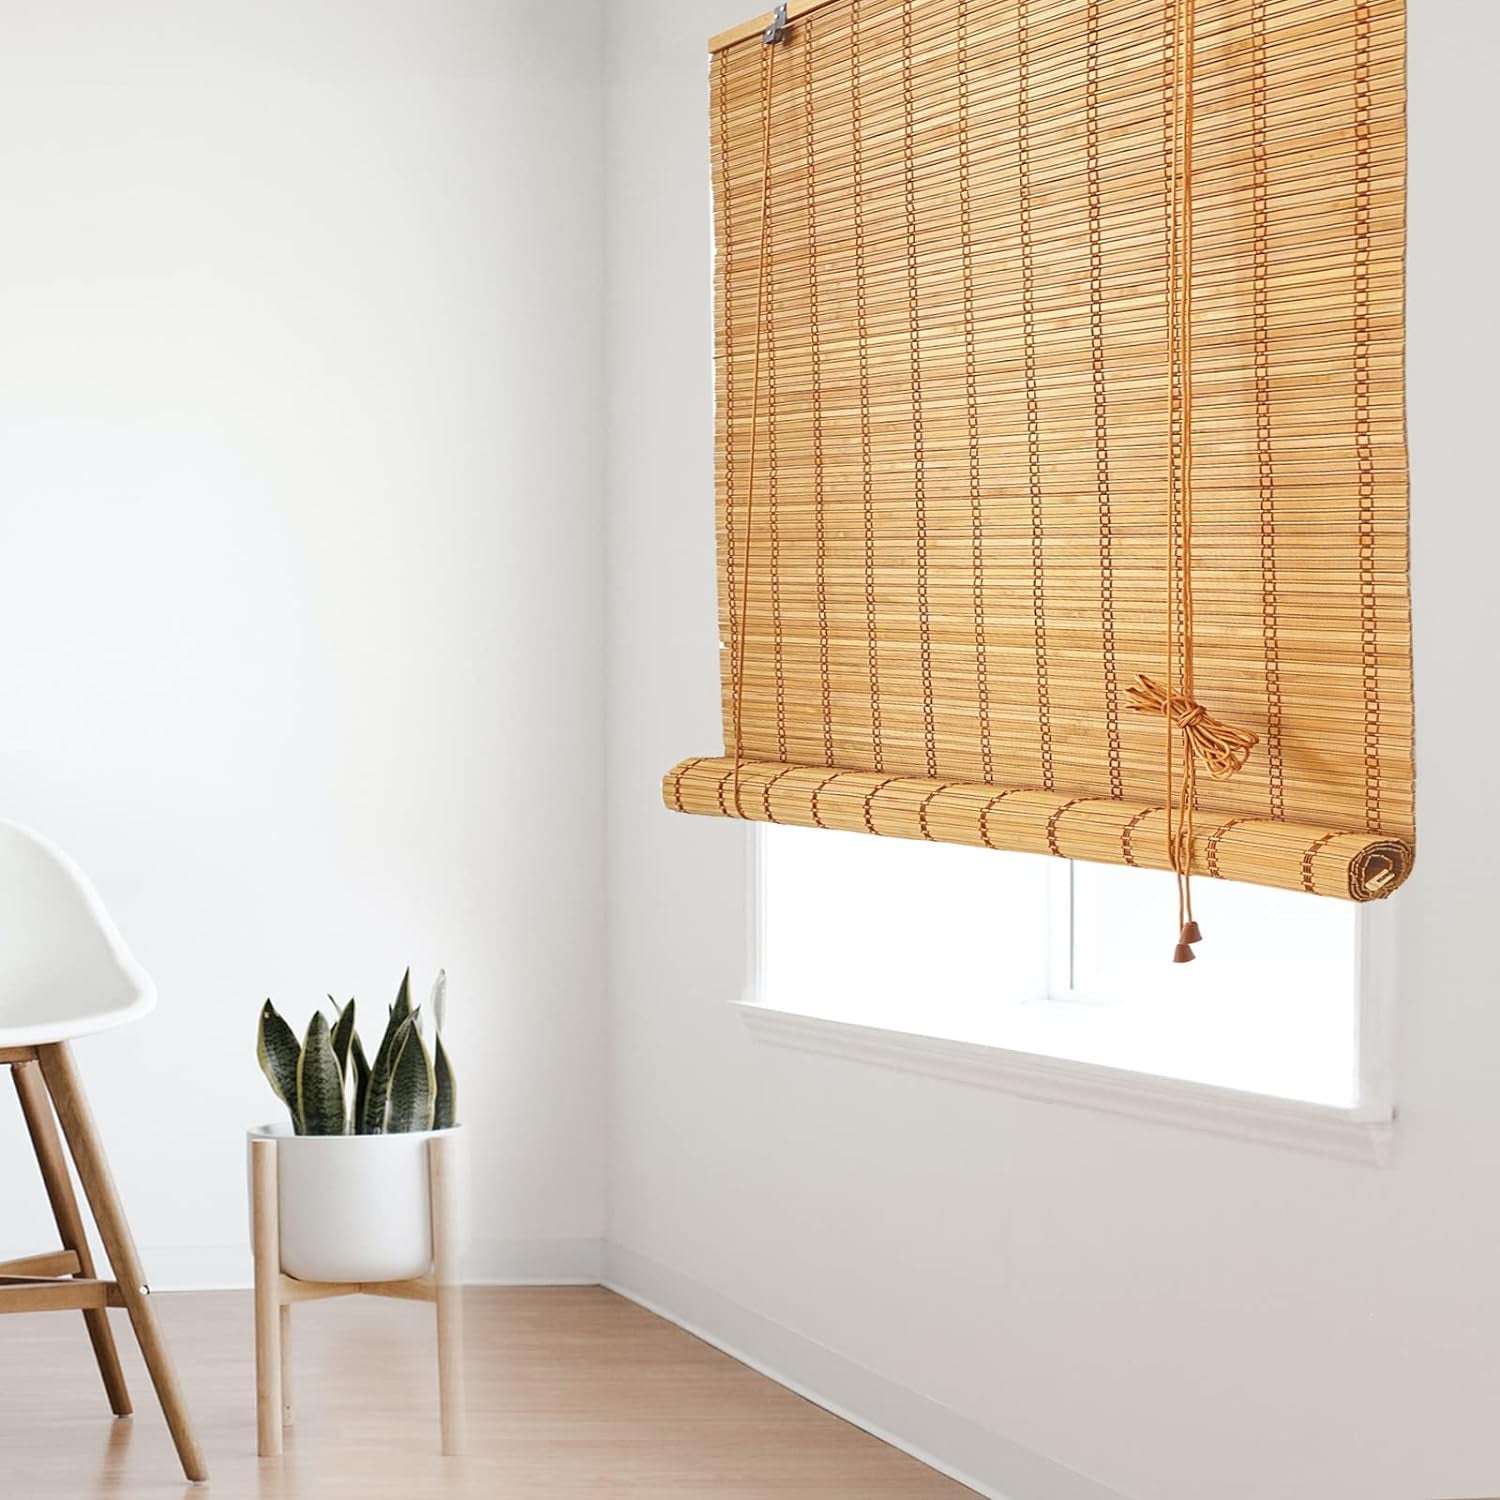 Bamboo Blinds, 30" W X 72" H Roman Window Shades for Home Office Hotel, Roll up Light Filtering Shades, Roller Sun Shades